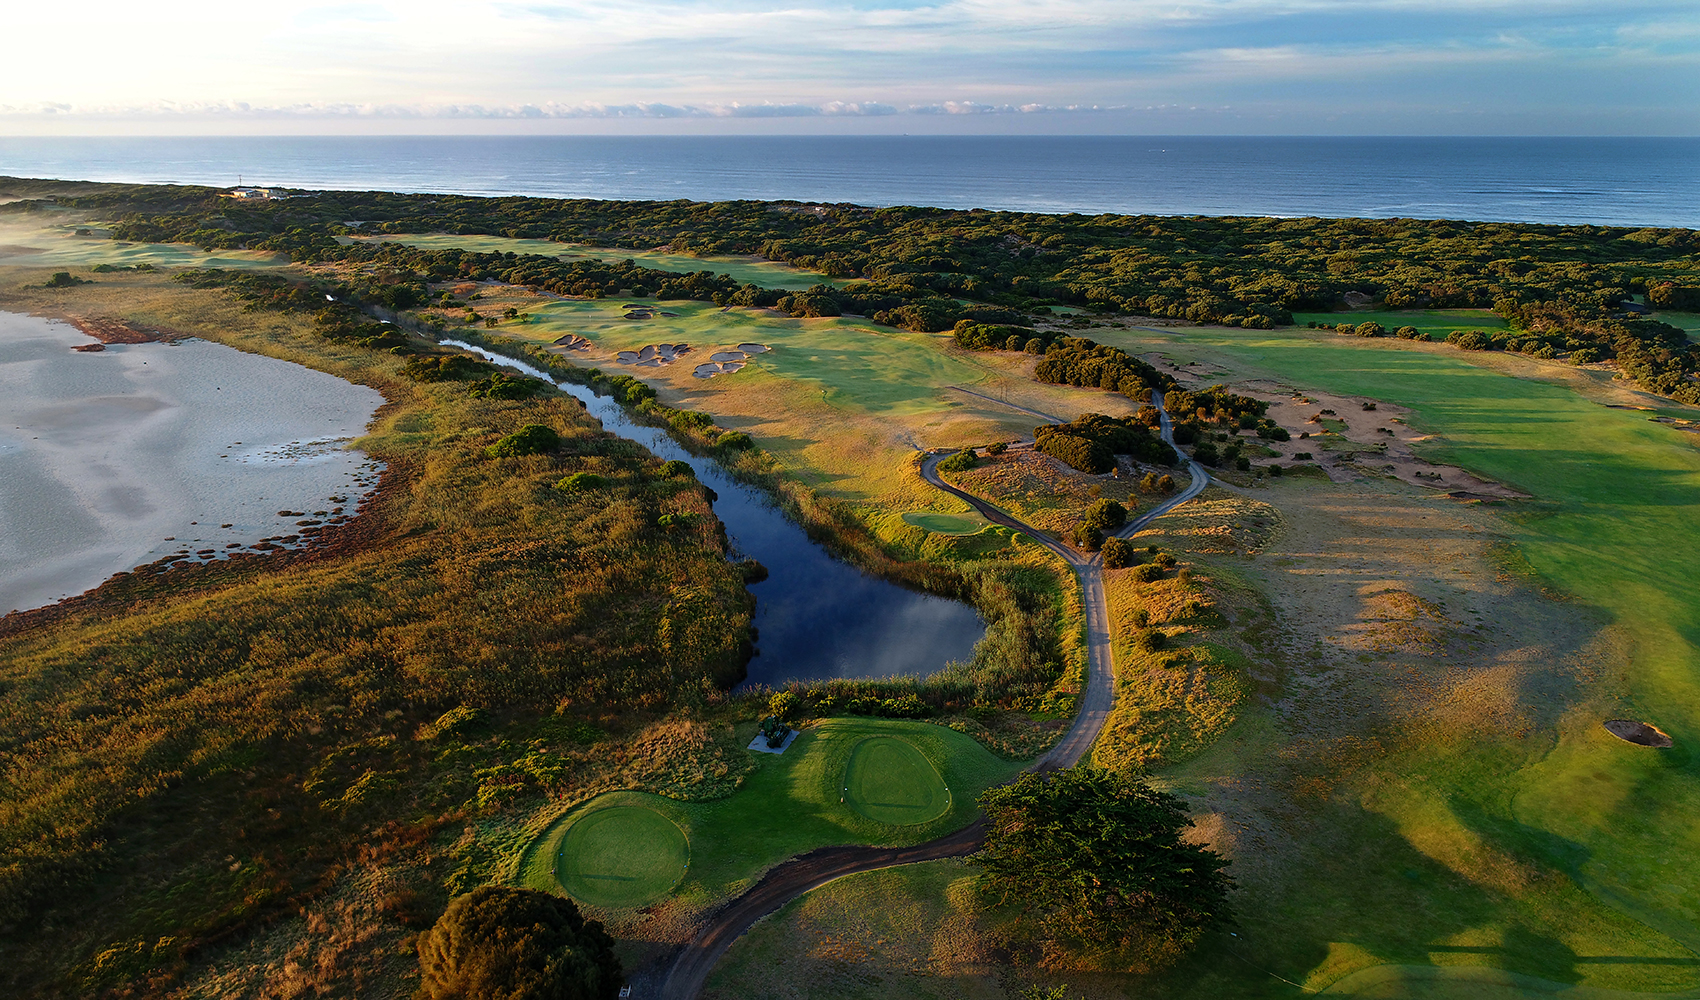 Few courses rival the Beach course at 13th Beach for beauty and challenge.